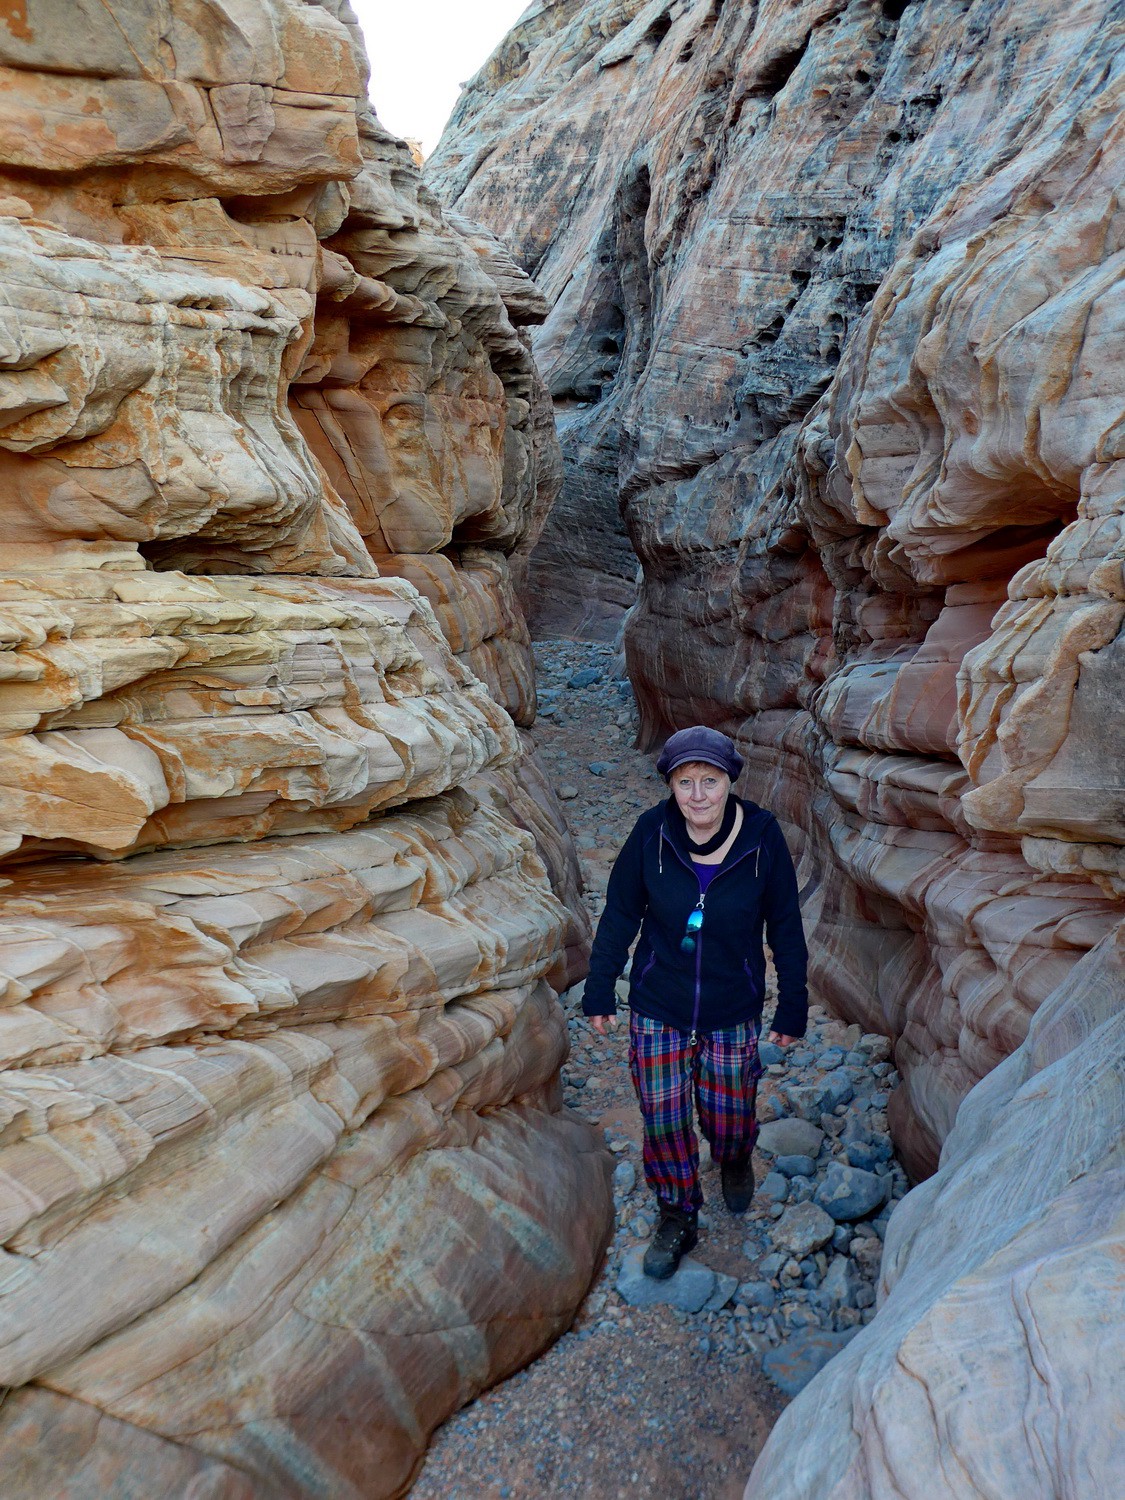 In the White Domes Slot Canyon